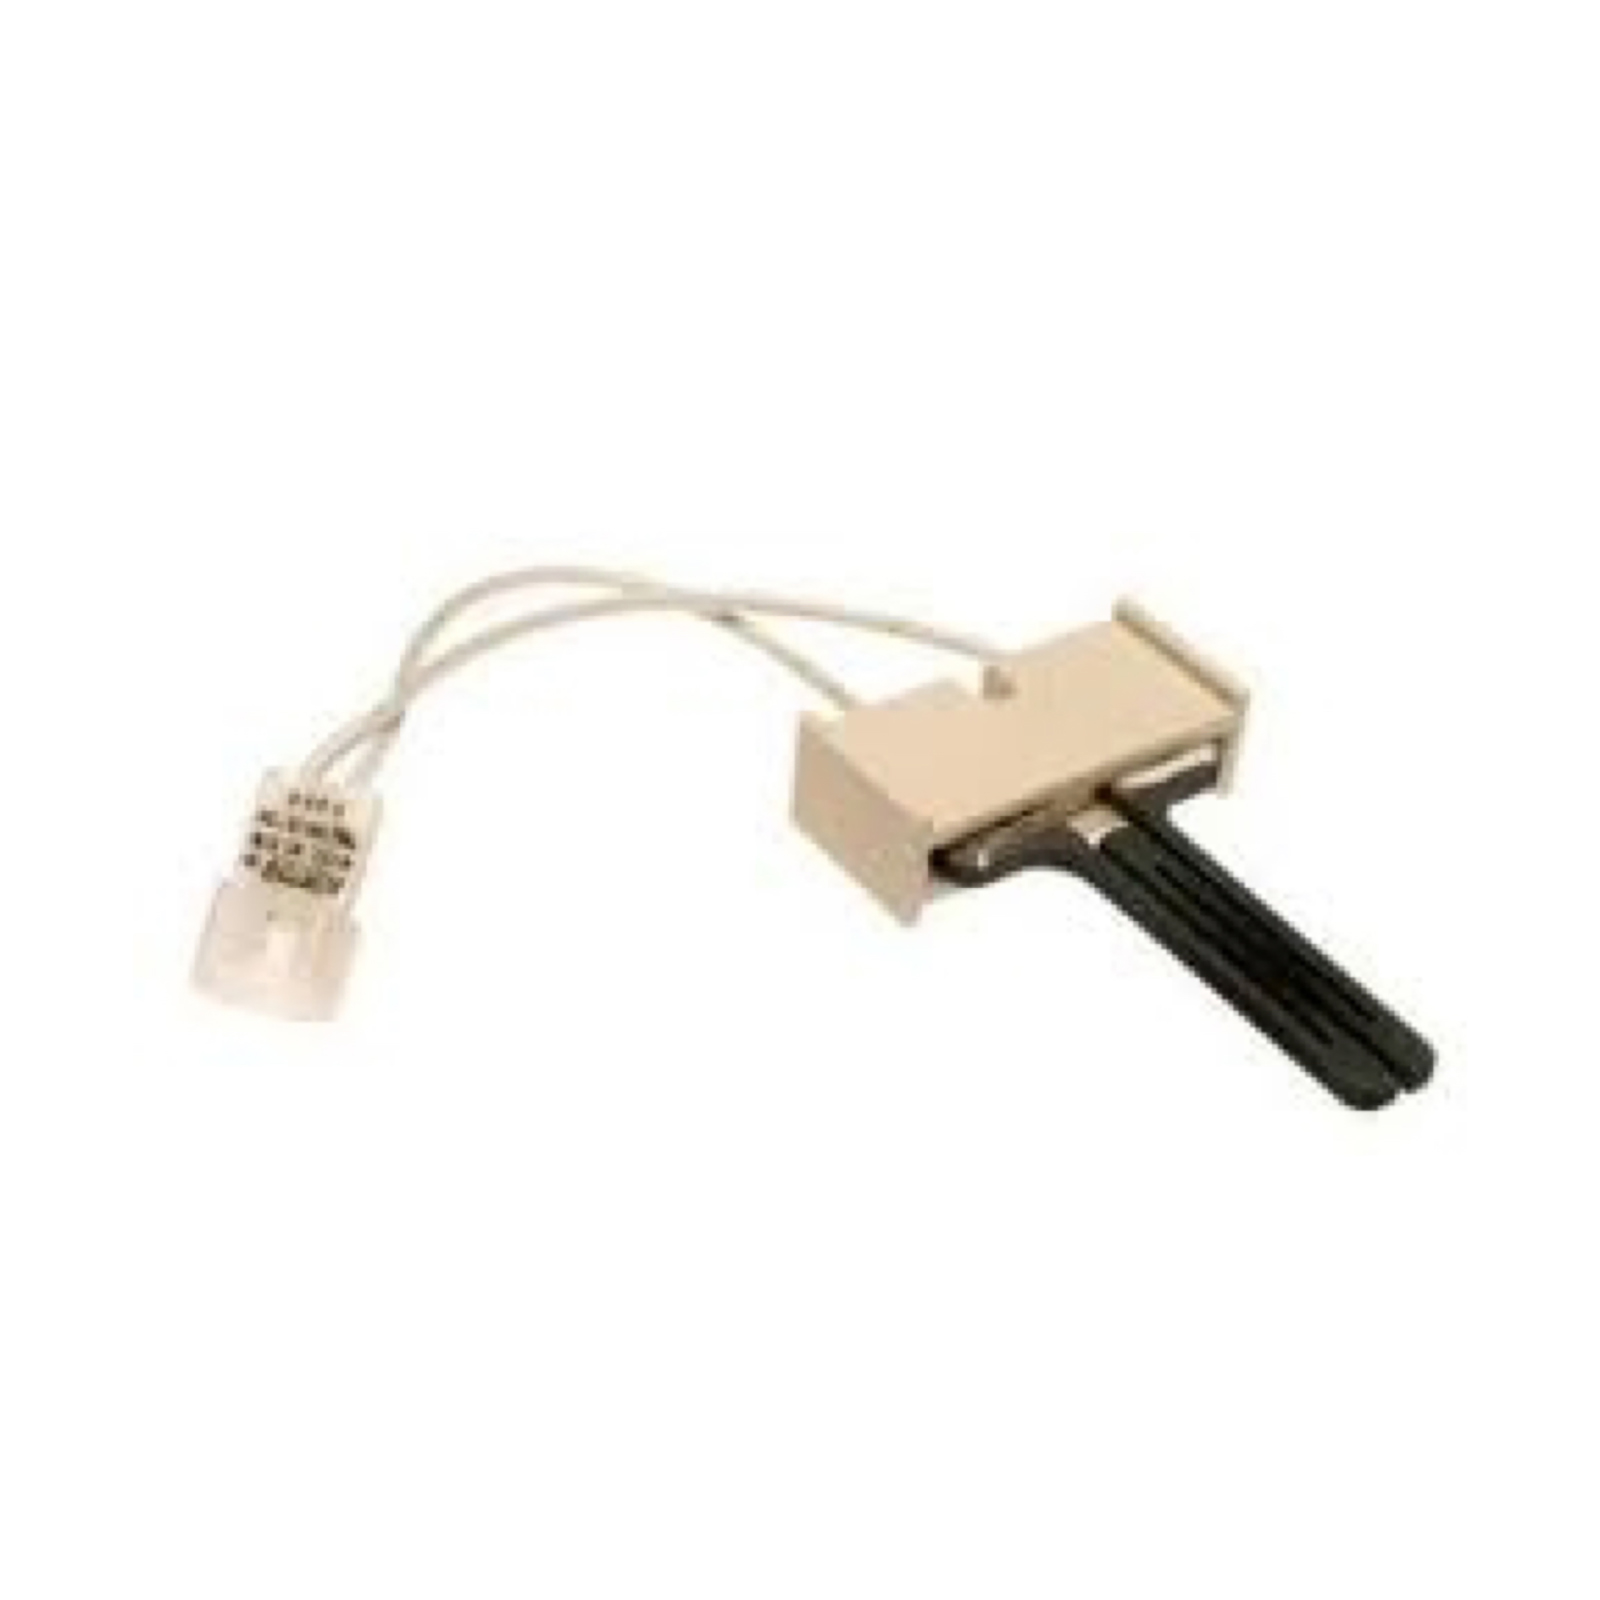 EDGEWATER PARTS 5303281151 Flat Ignitor for Whirlpool Dryers